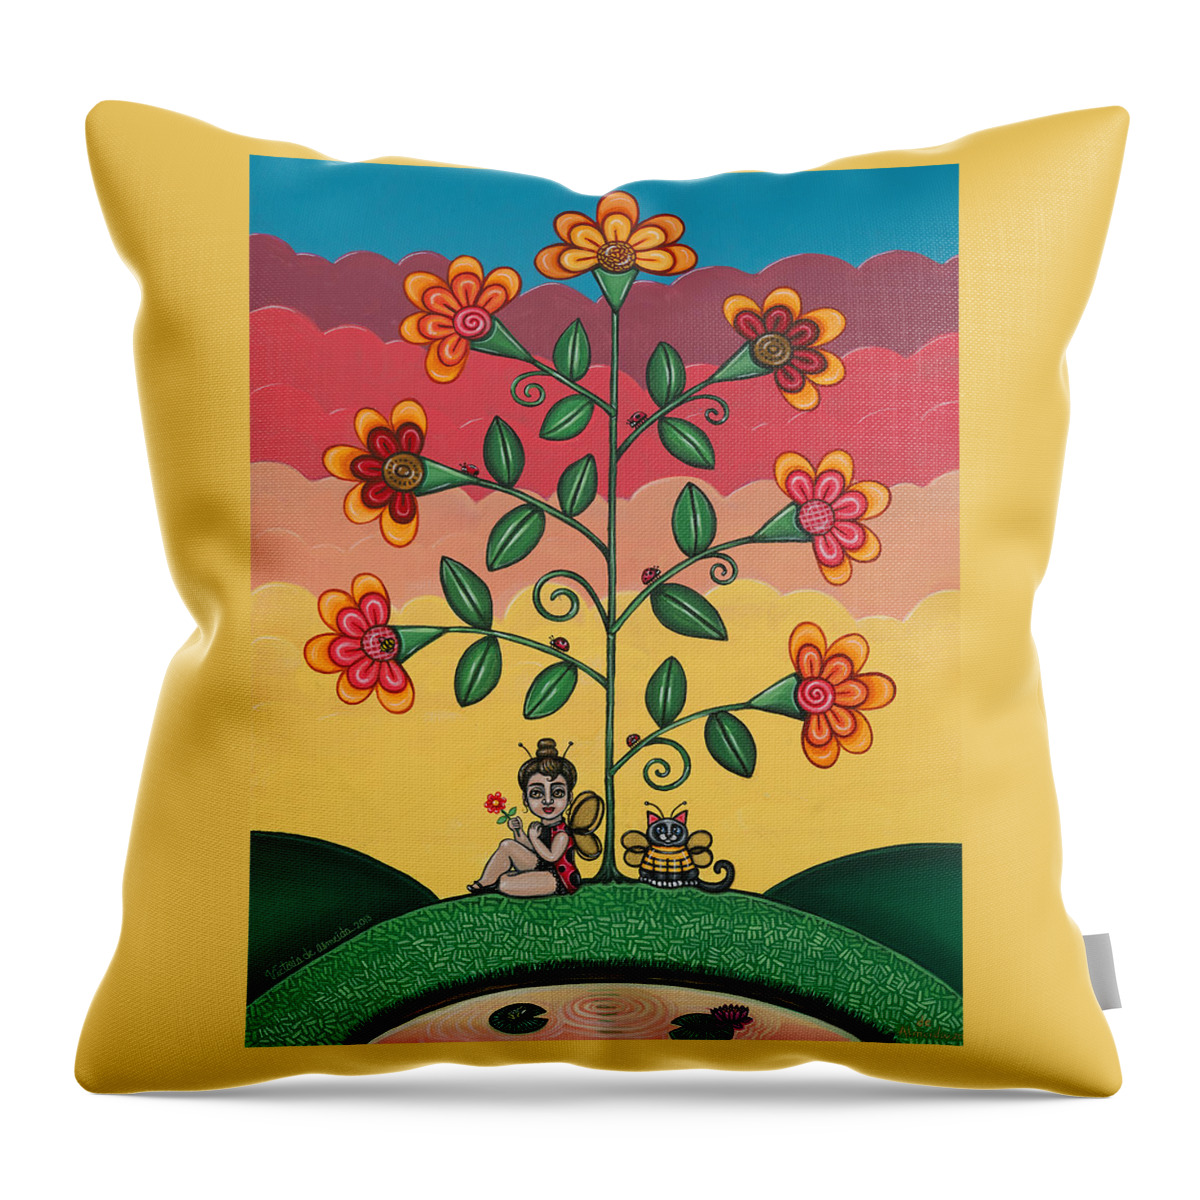 Bees Throw Pillow featuring the painting Wannabees by Victoria De Almeida